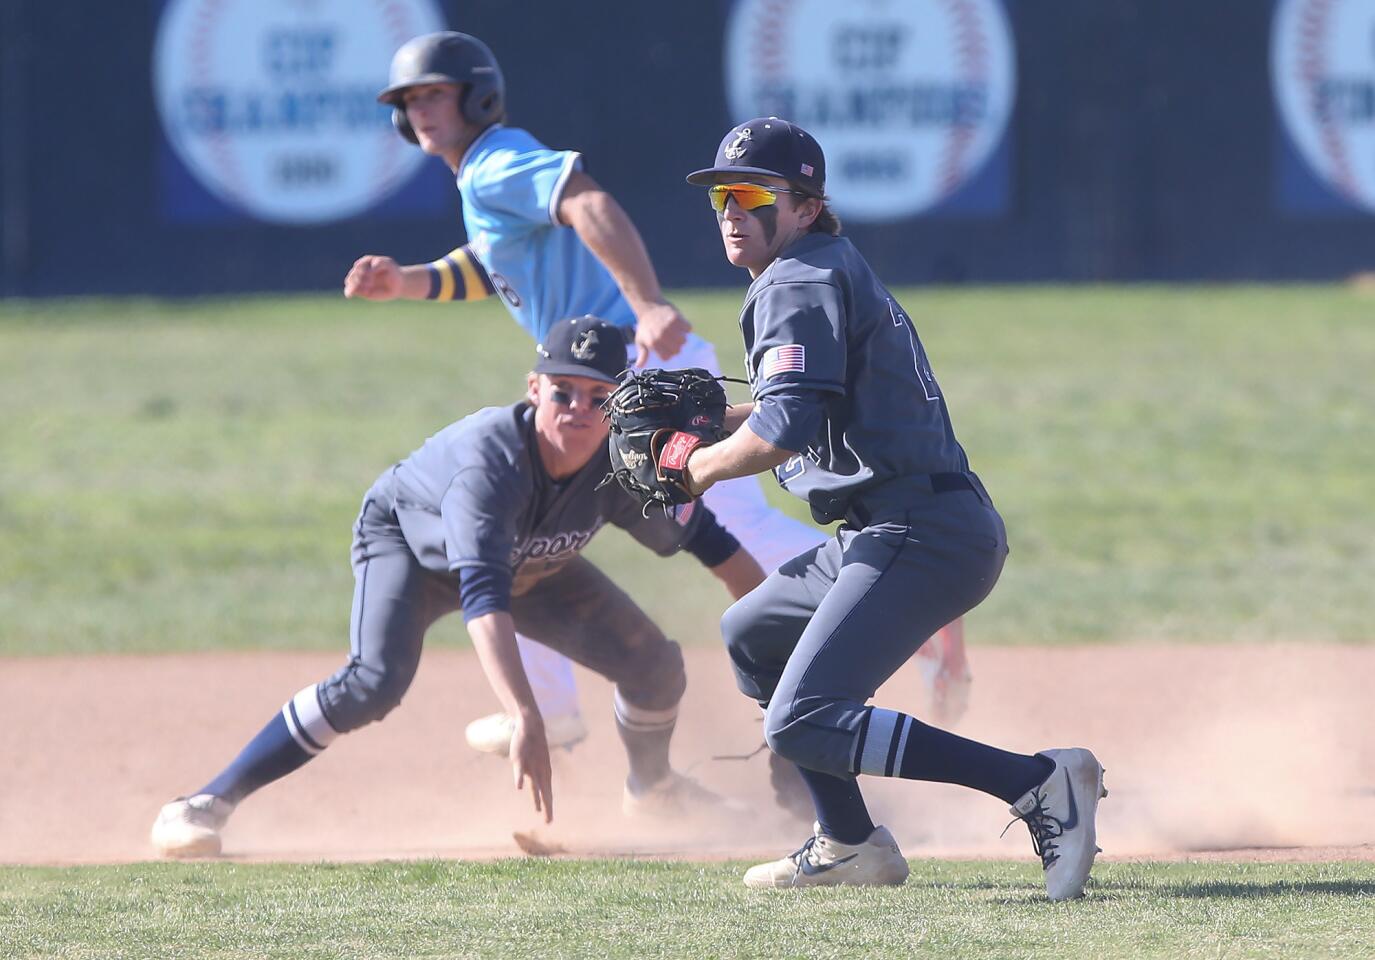 Newport Harbor first baseman Braham Duncan, right, scoops up an infield hit and throws to home to get the out in a Wave League game at Marina on Tuesday.